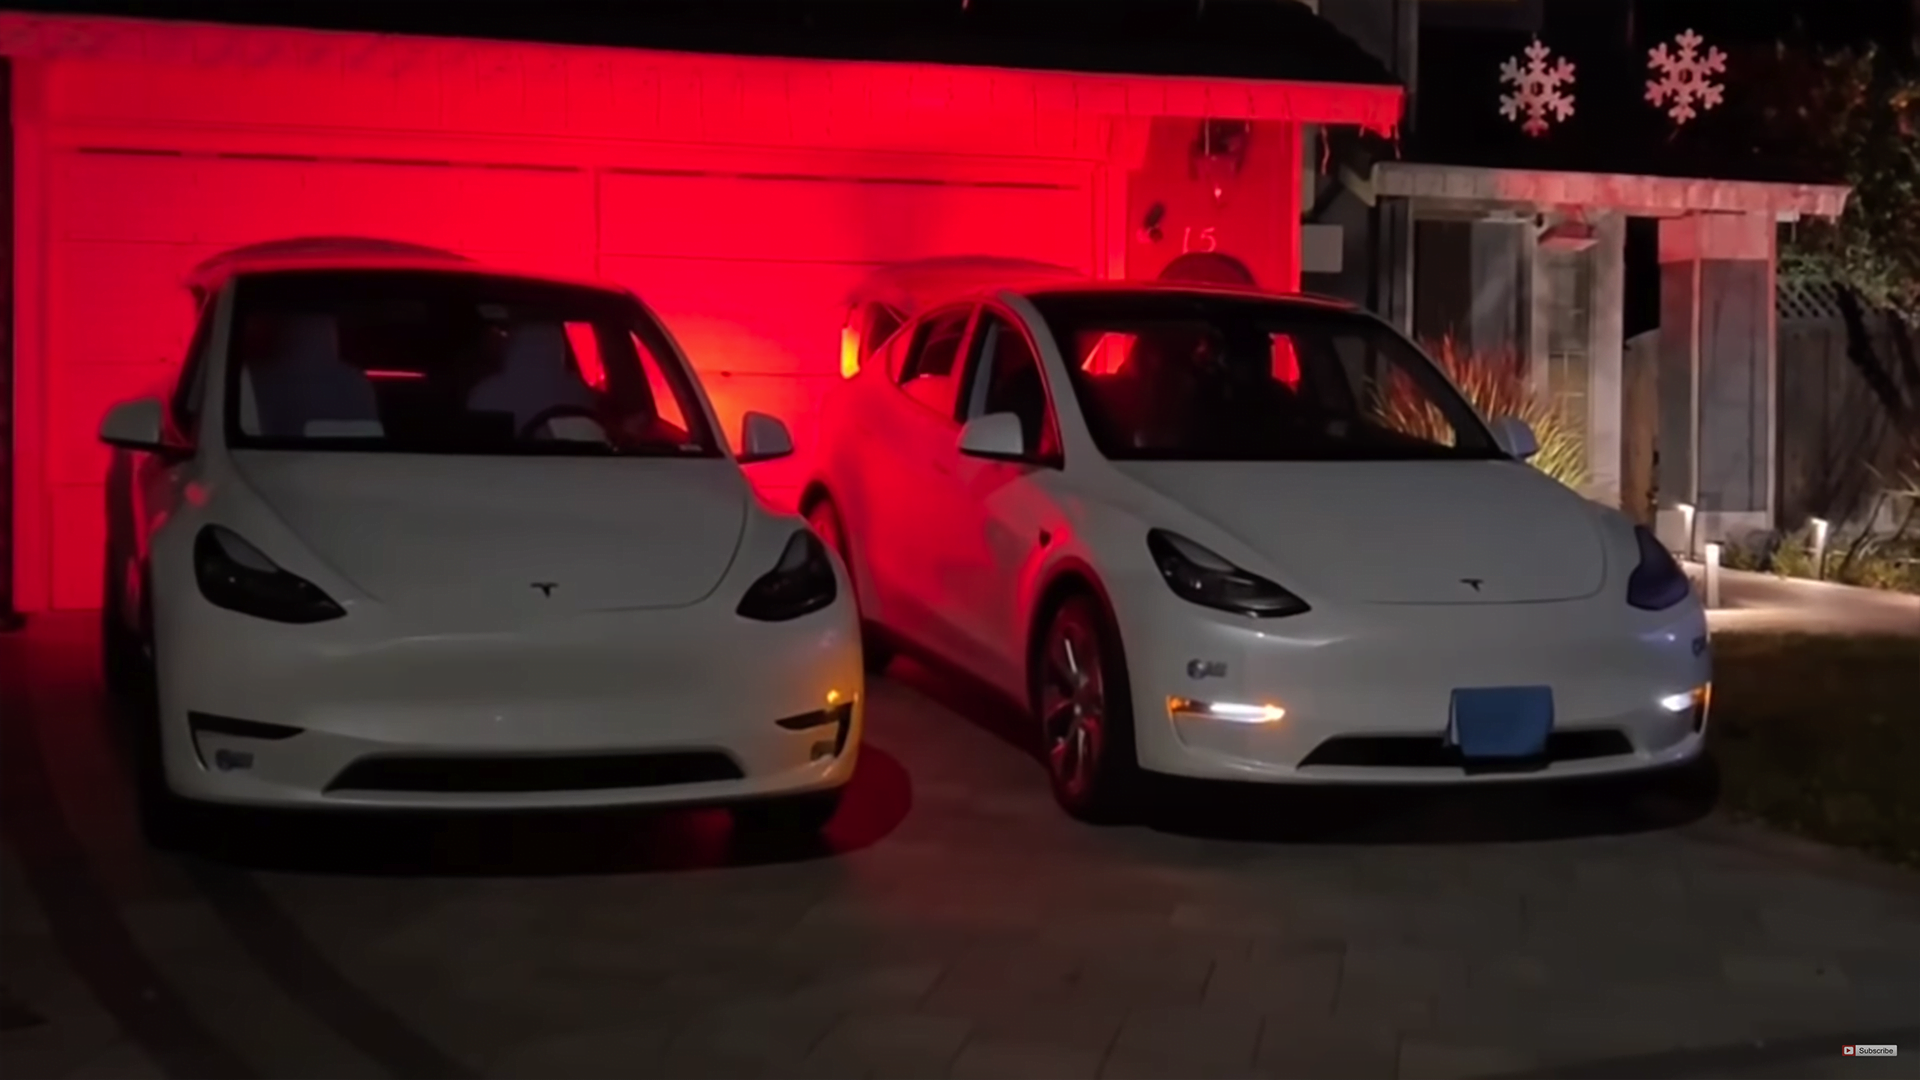 Watch As These Teslas Dance to “Beat It” In Perfect Synchronization